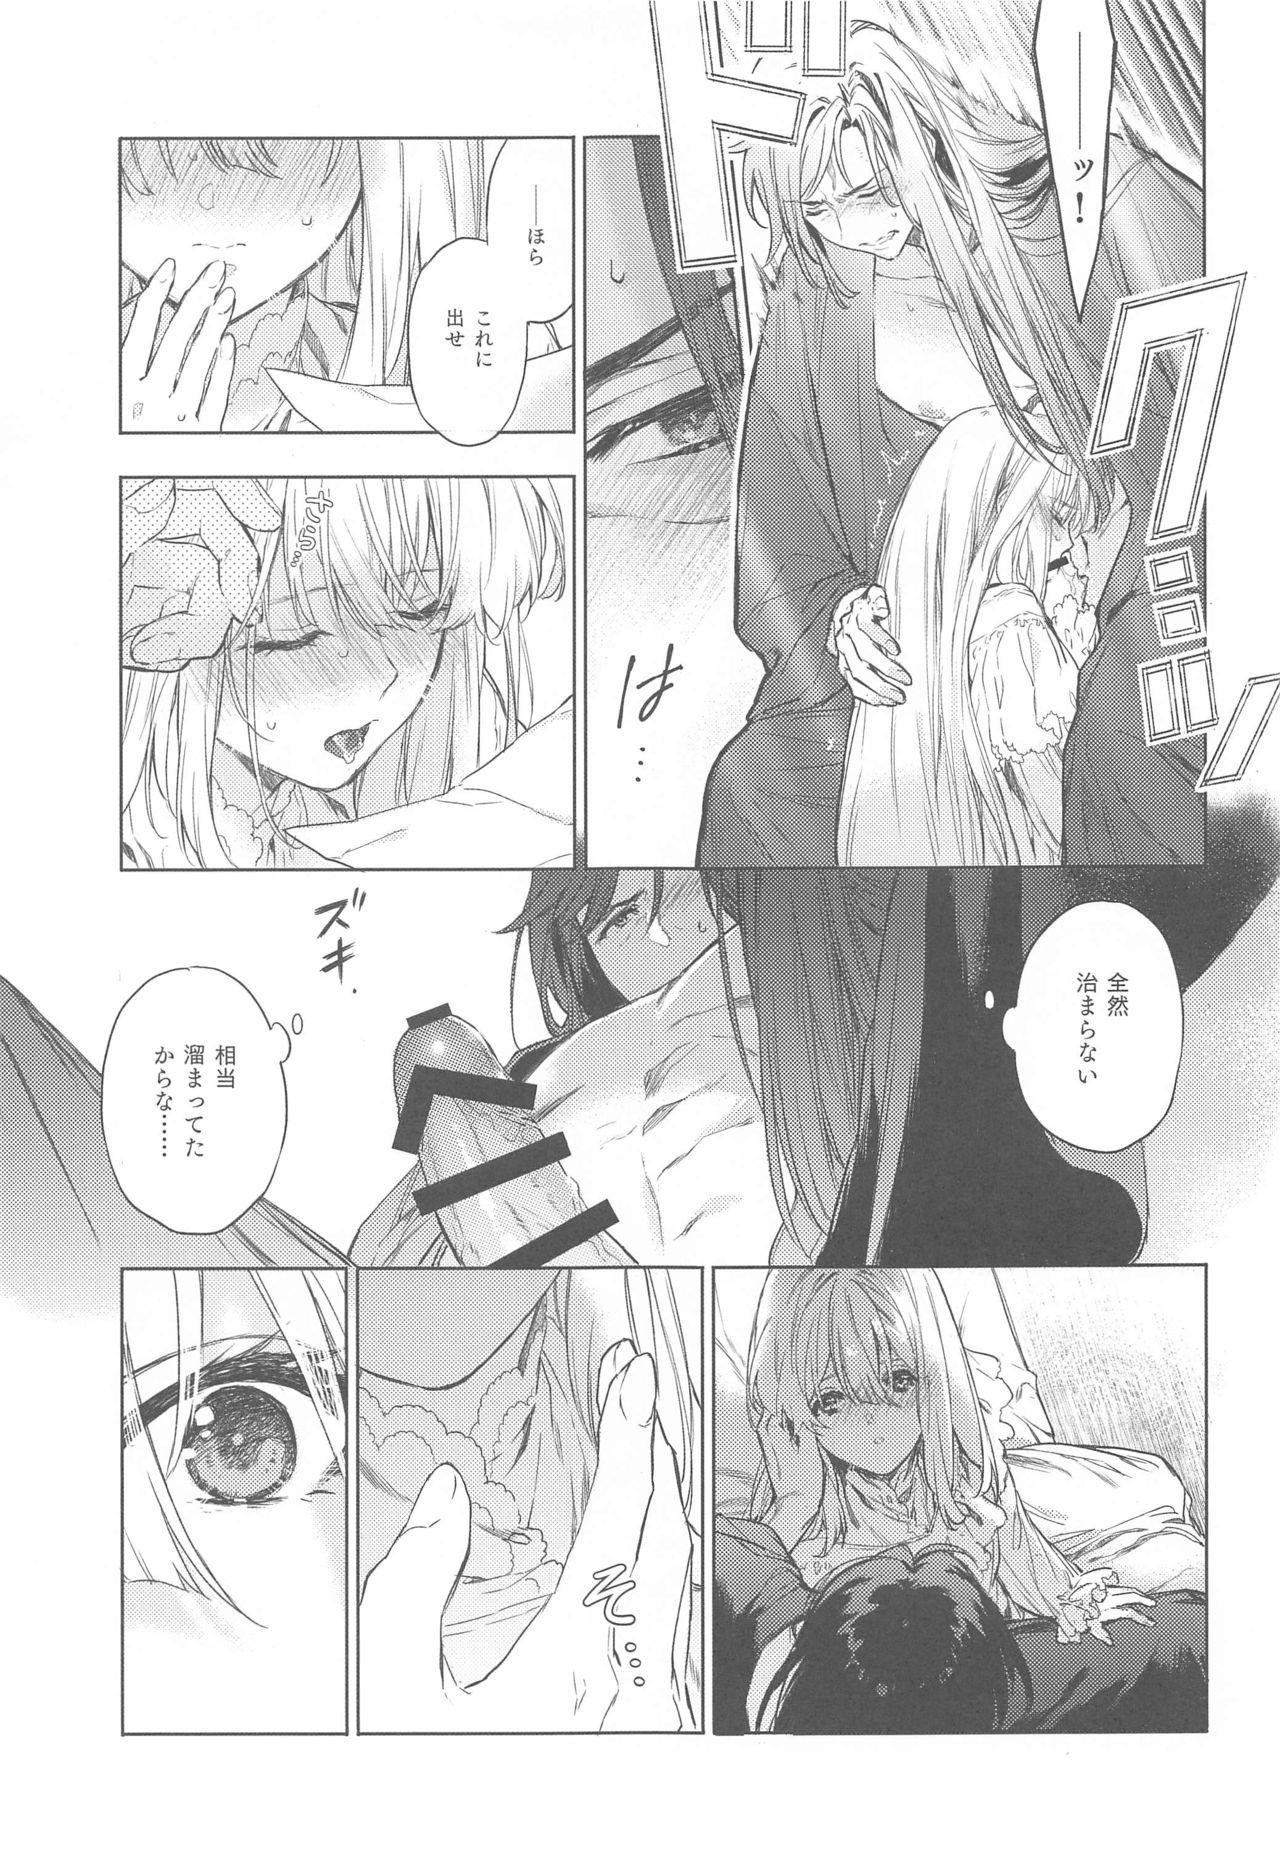 Blowjob Contest Scars of love - Violet evergarden Masterbation - Page 8